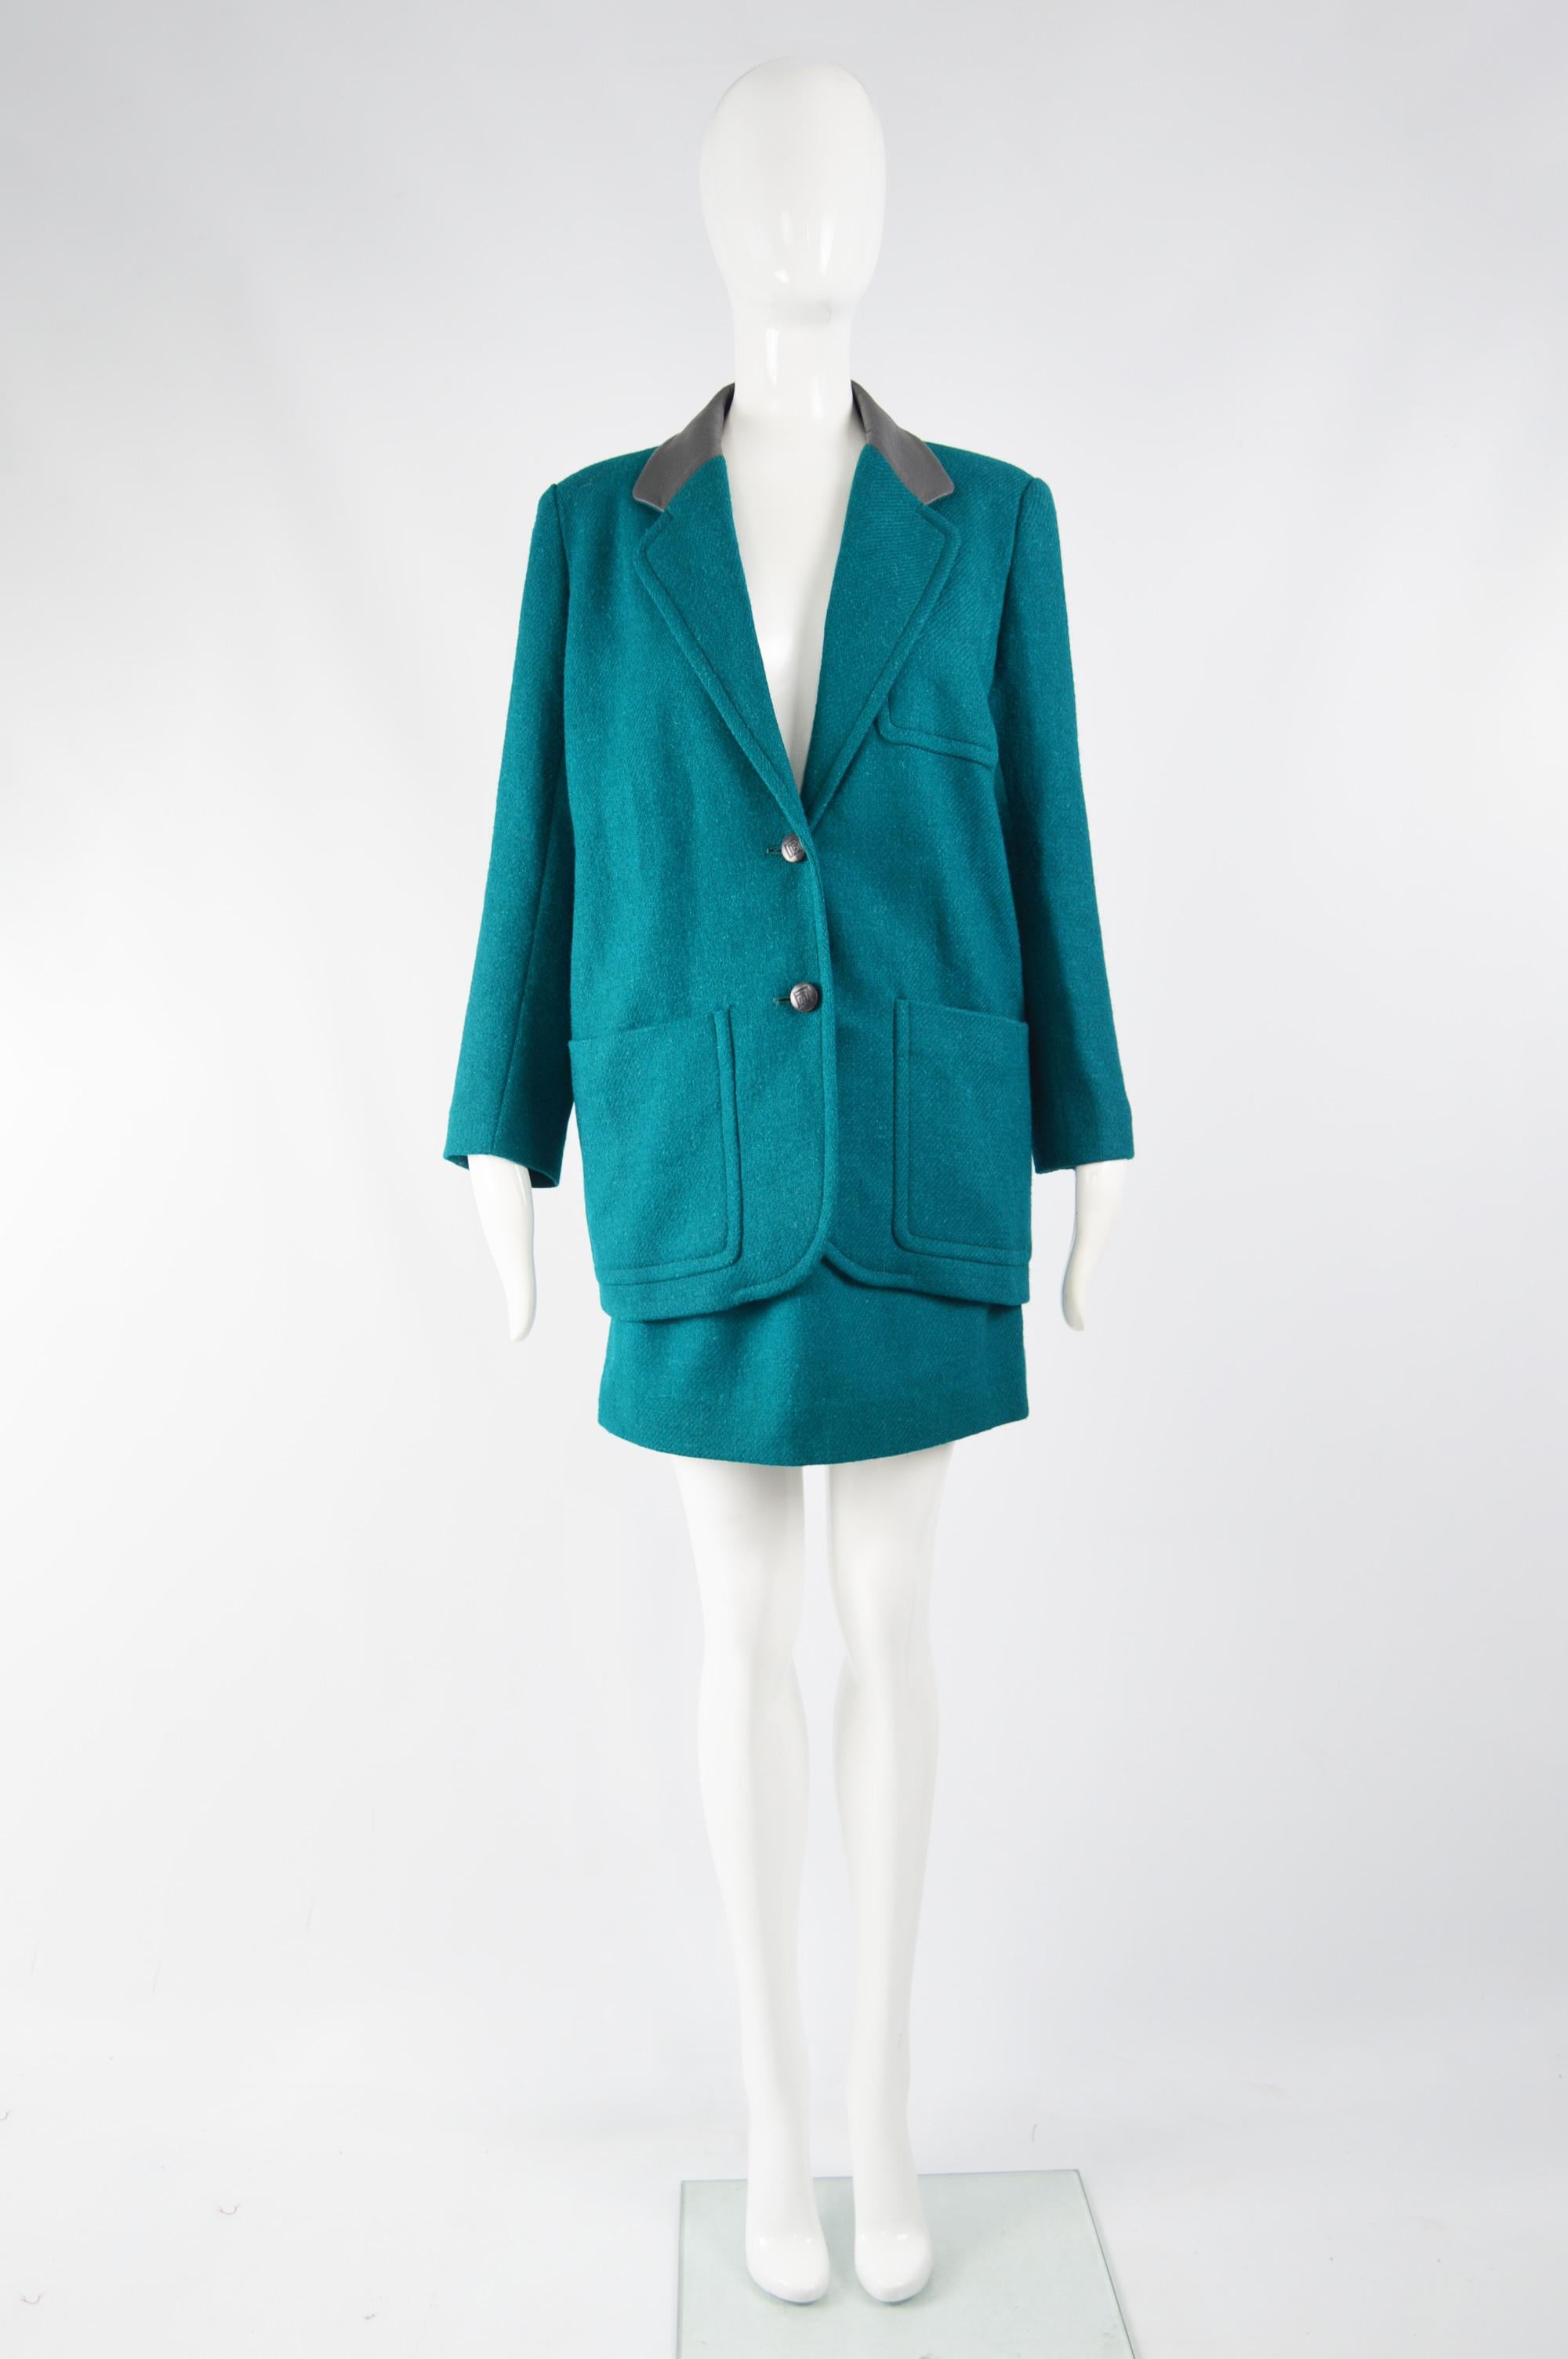 A fabulous vintage womens Pierre Balmain 2 piece skirt suit from the 80s. In a turquoise / teal wool with a dark grey leather collar. It consists of an oversized blazer with shoulder pads and a mini skirt (looks to have been shortened which gives a